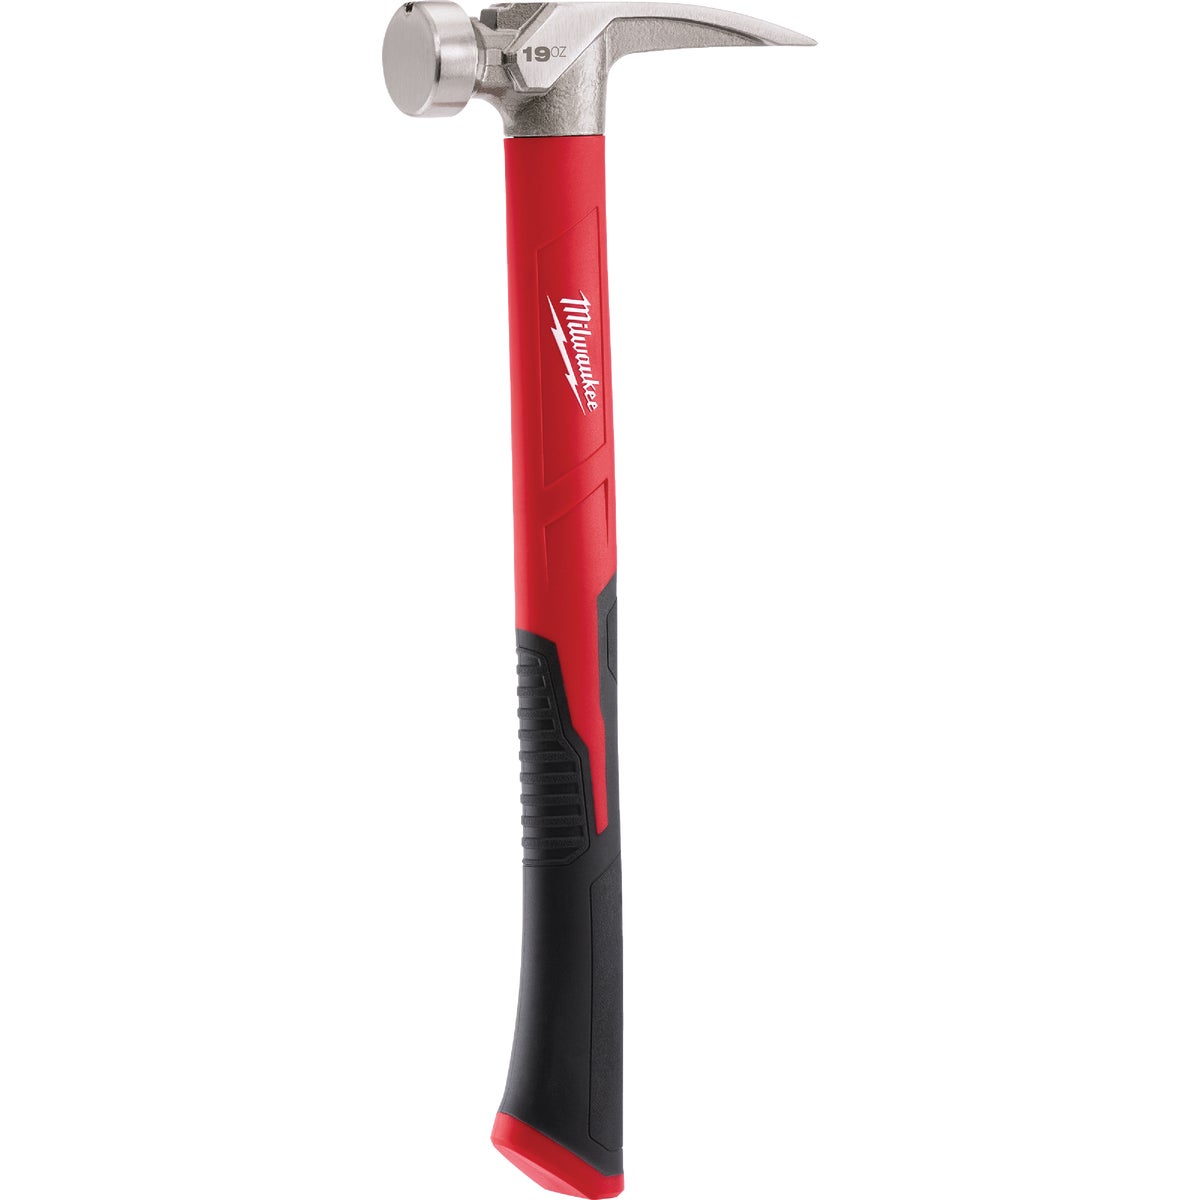 Milwaukee 19 Oz. Smooth-Face Framing Hammer with Poly/Fiberglass Handle